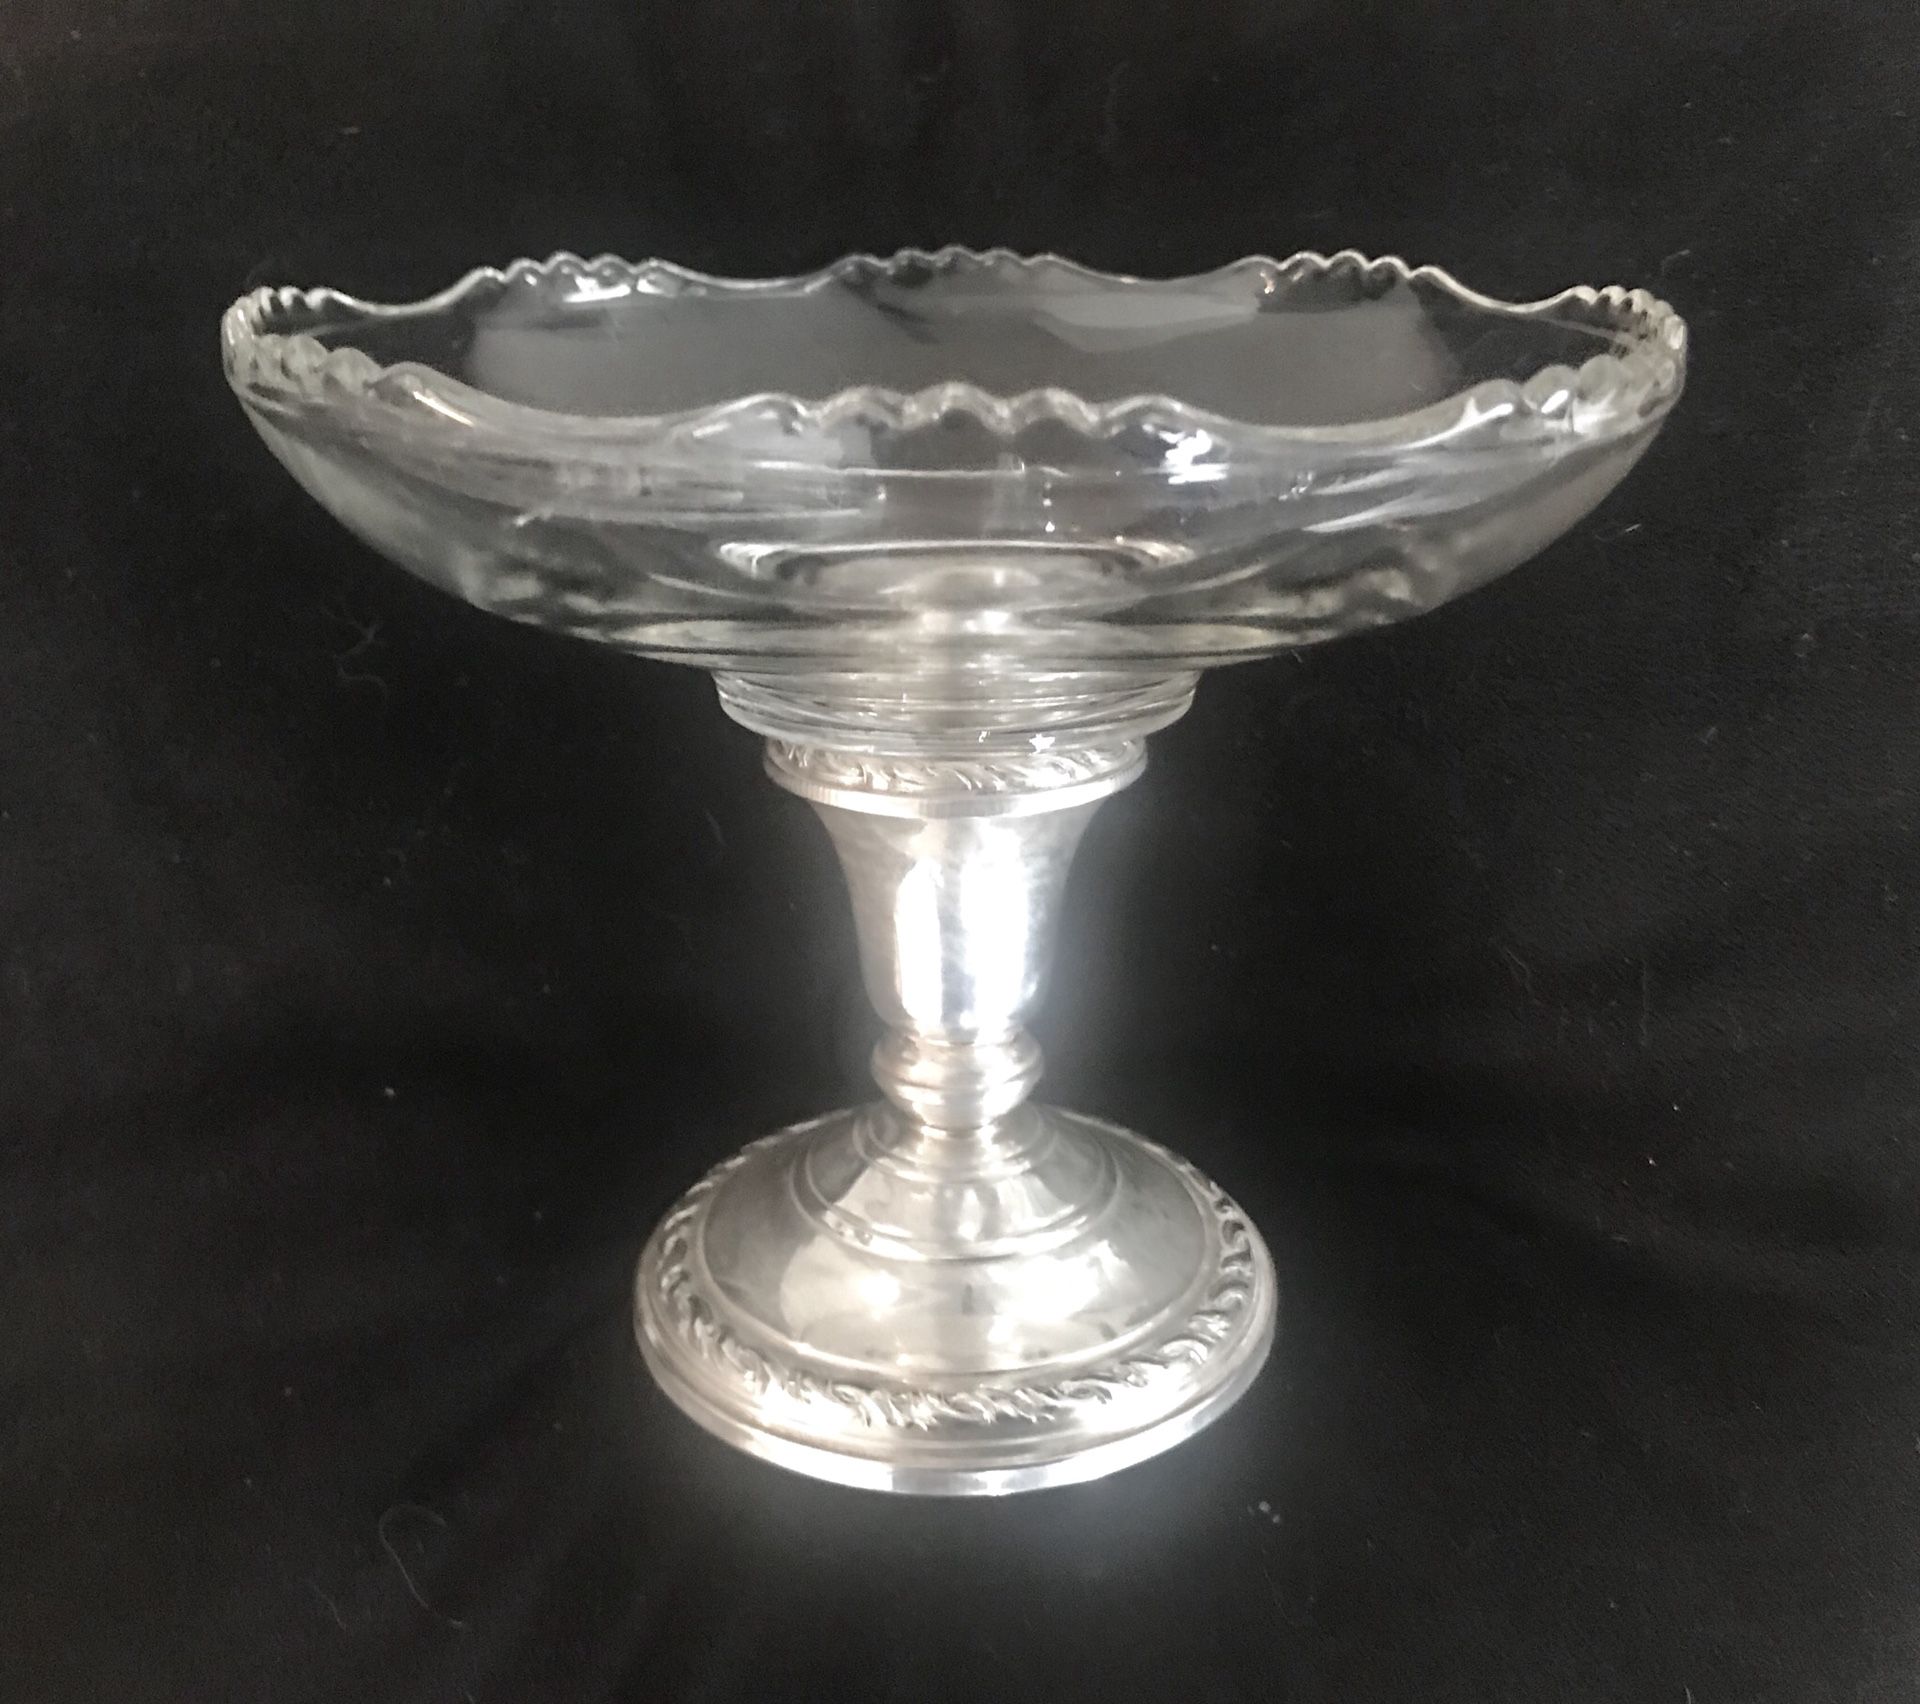 ANTIQUE AMSTON STERLING 540 CRYSTAL GLASS COMPOTE BOWL WITH CONVERTIBLE CANDLE STICK HOLDER FUNCTION